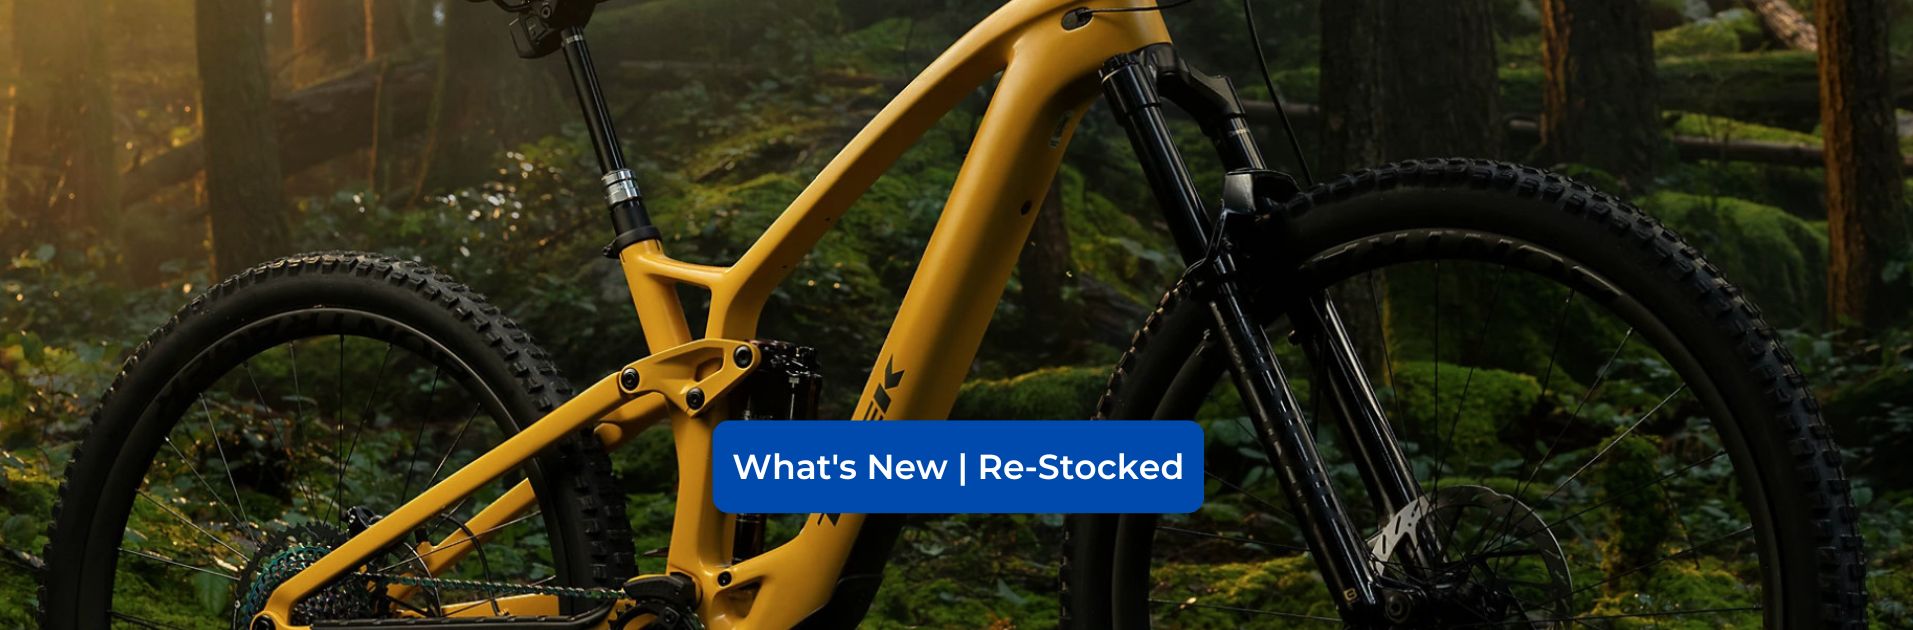 Trail Bicycles | What's New - Re-Stocked